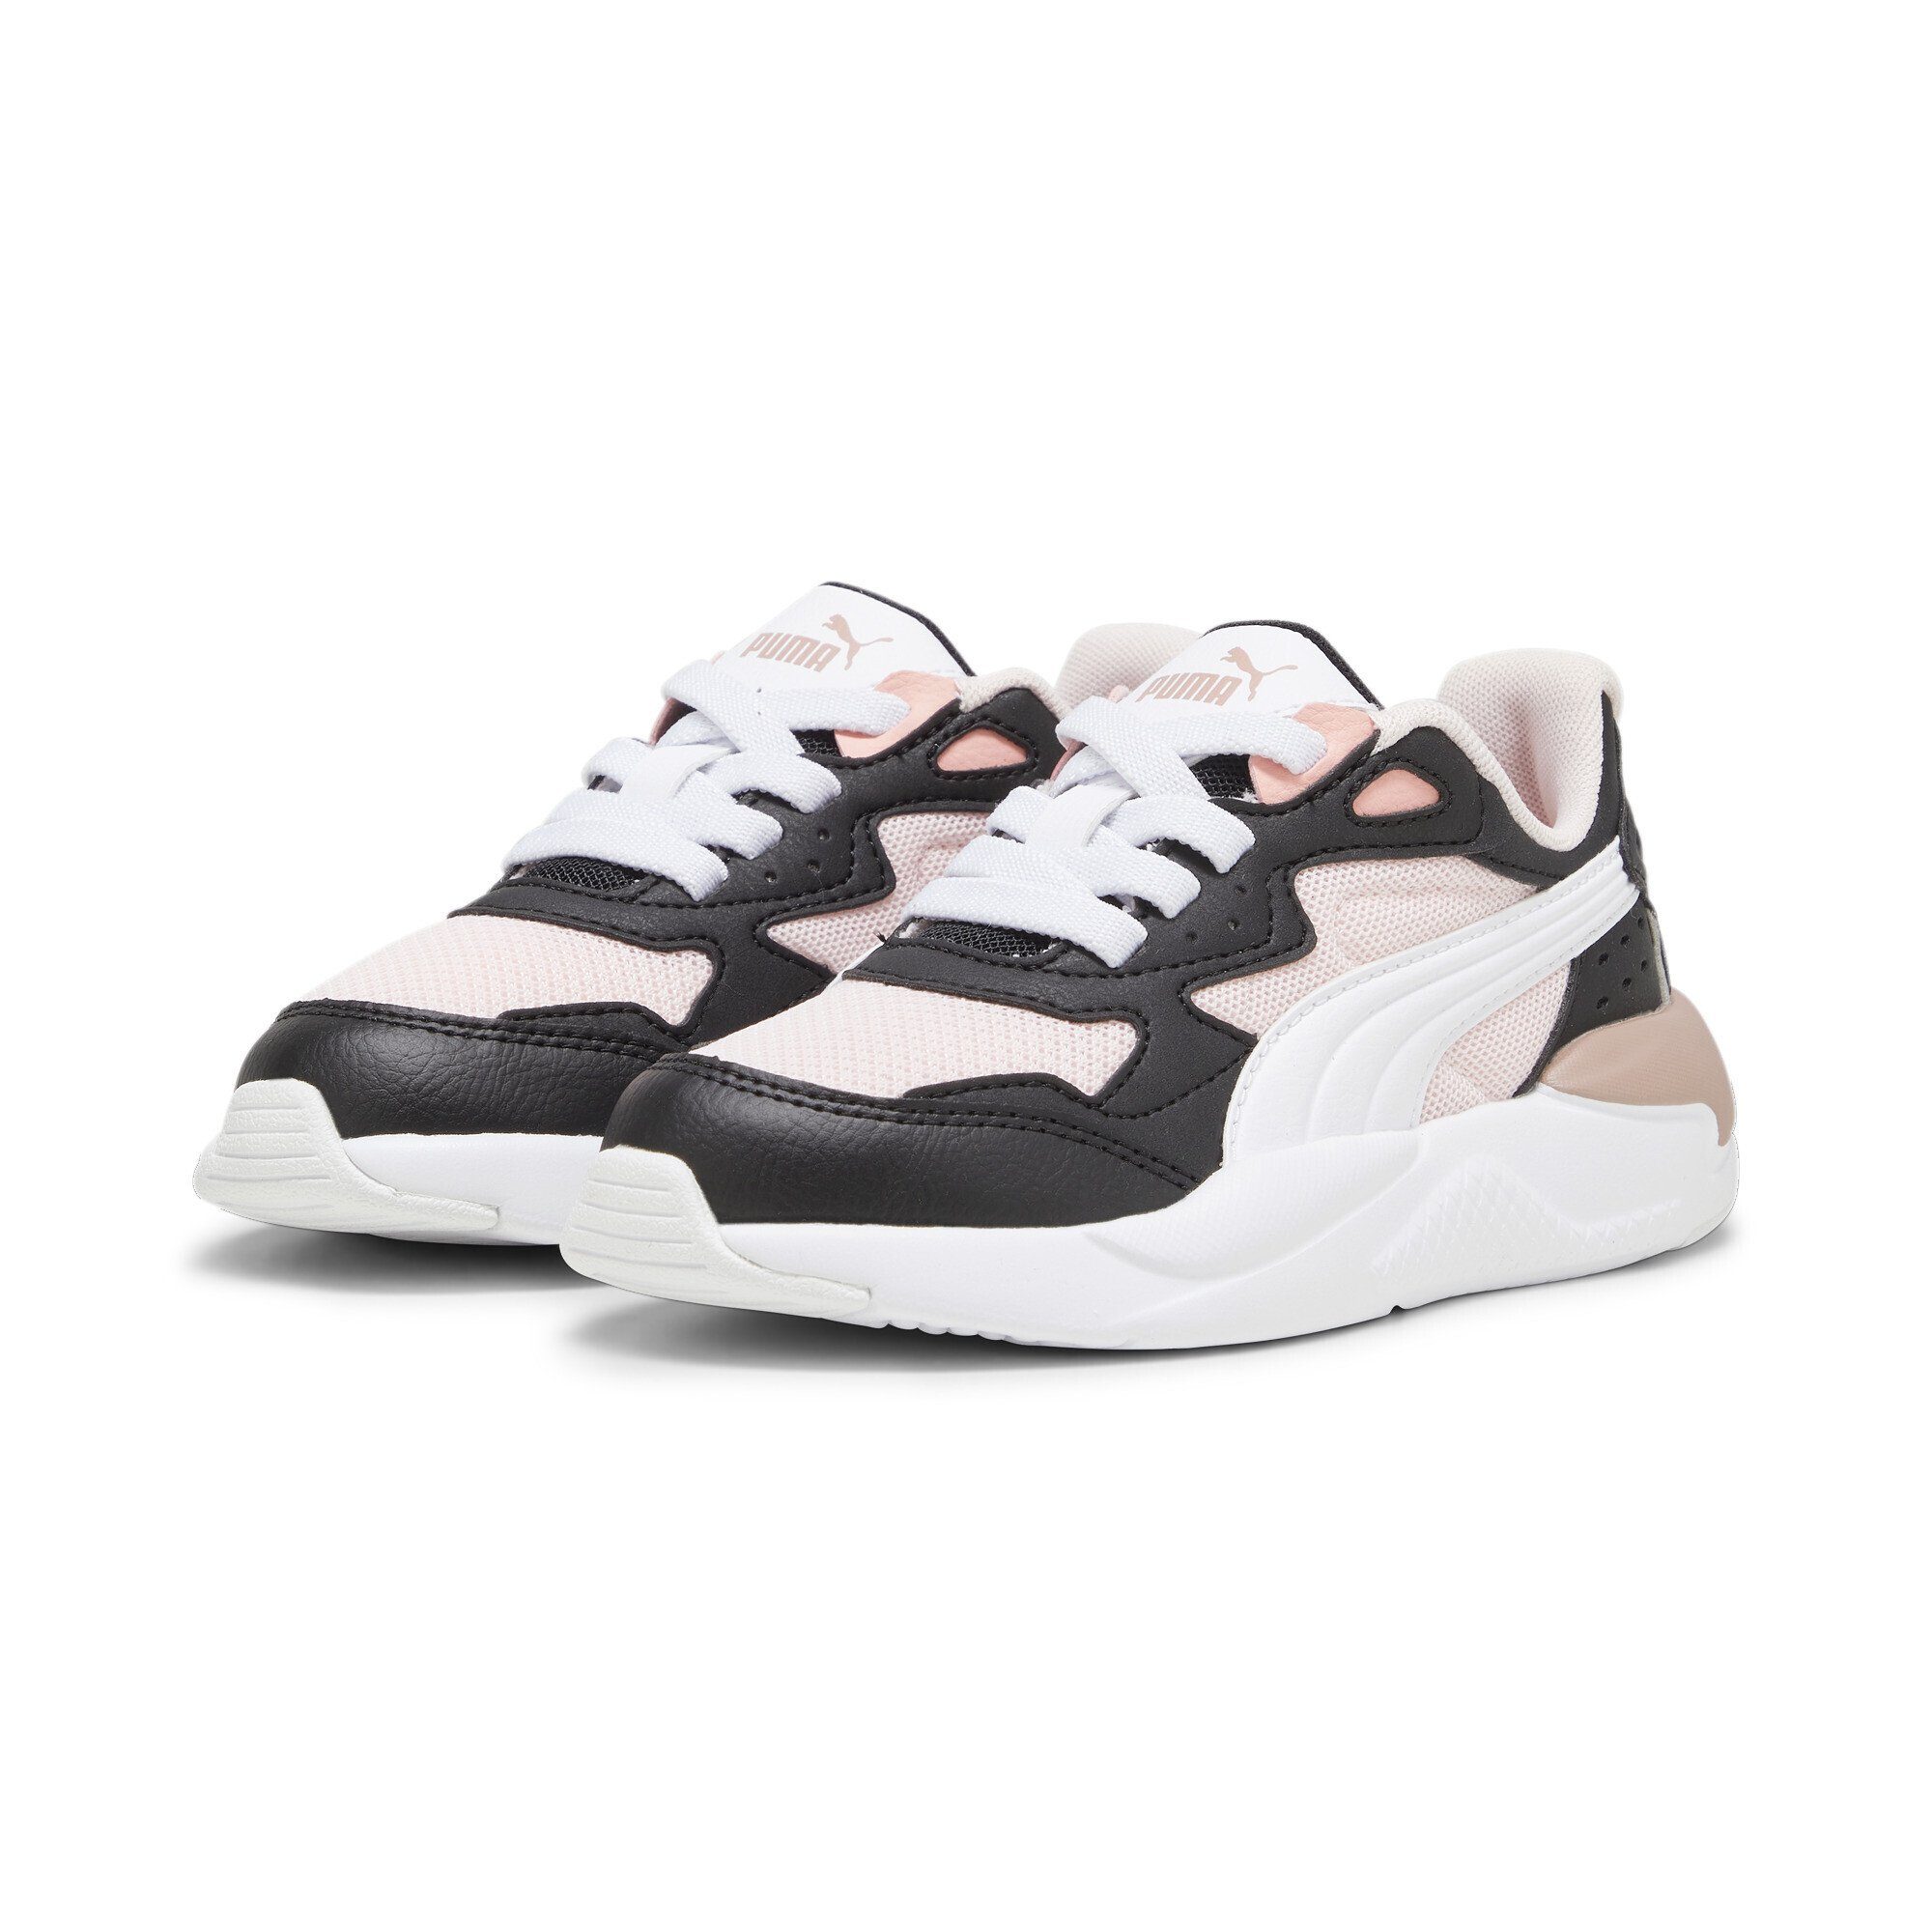 PUMA X-Ray Speed AC Sneakers Sneaker Frosty Pink White Black Peach Smoothie